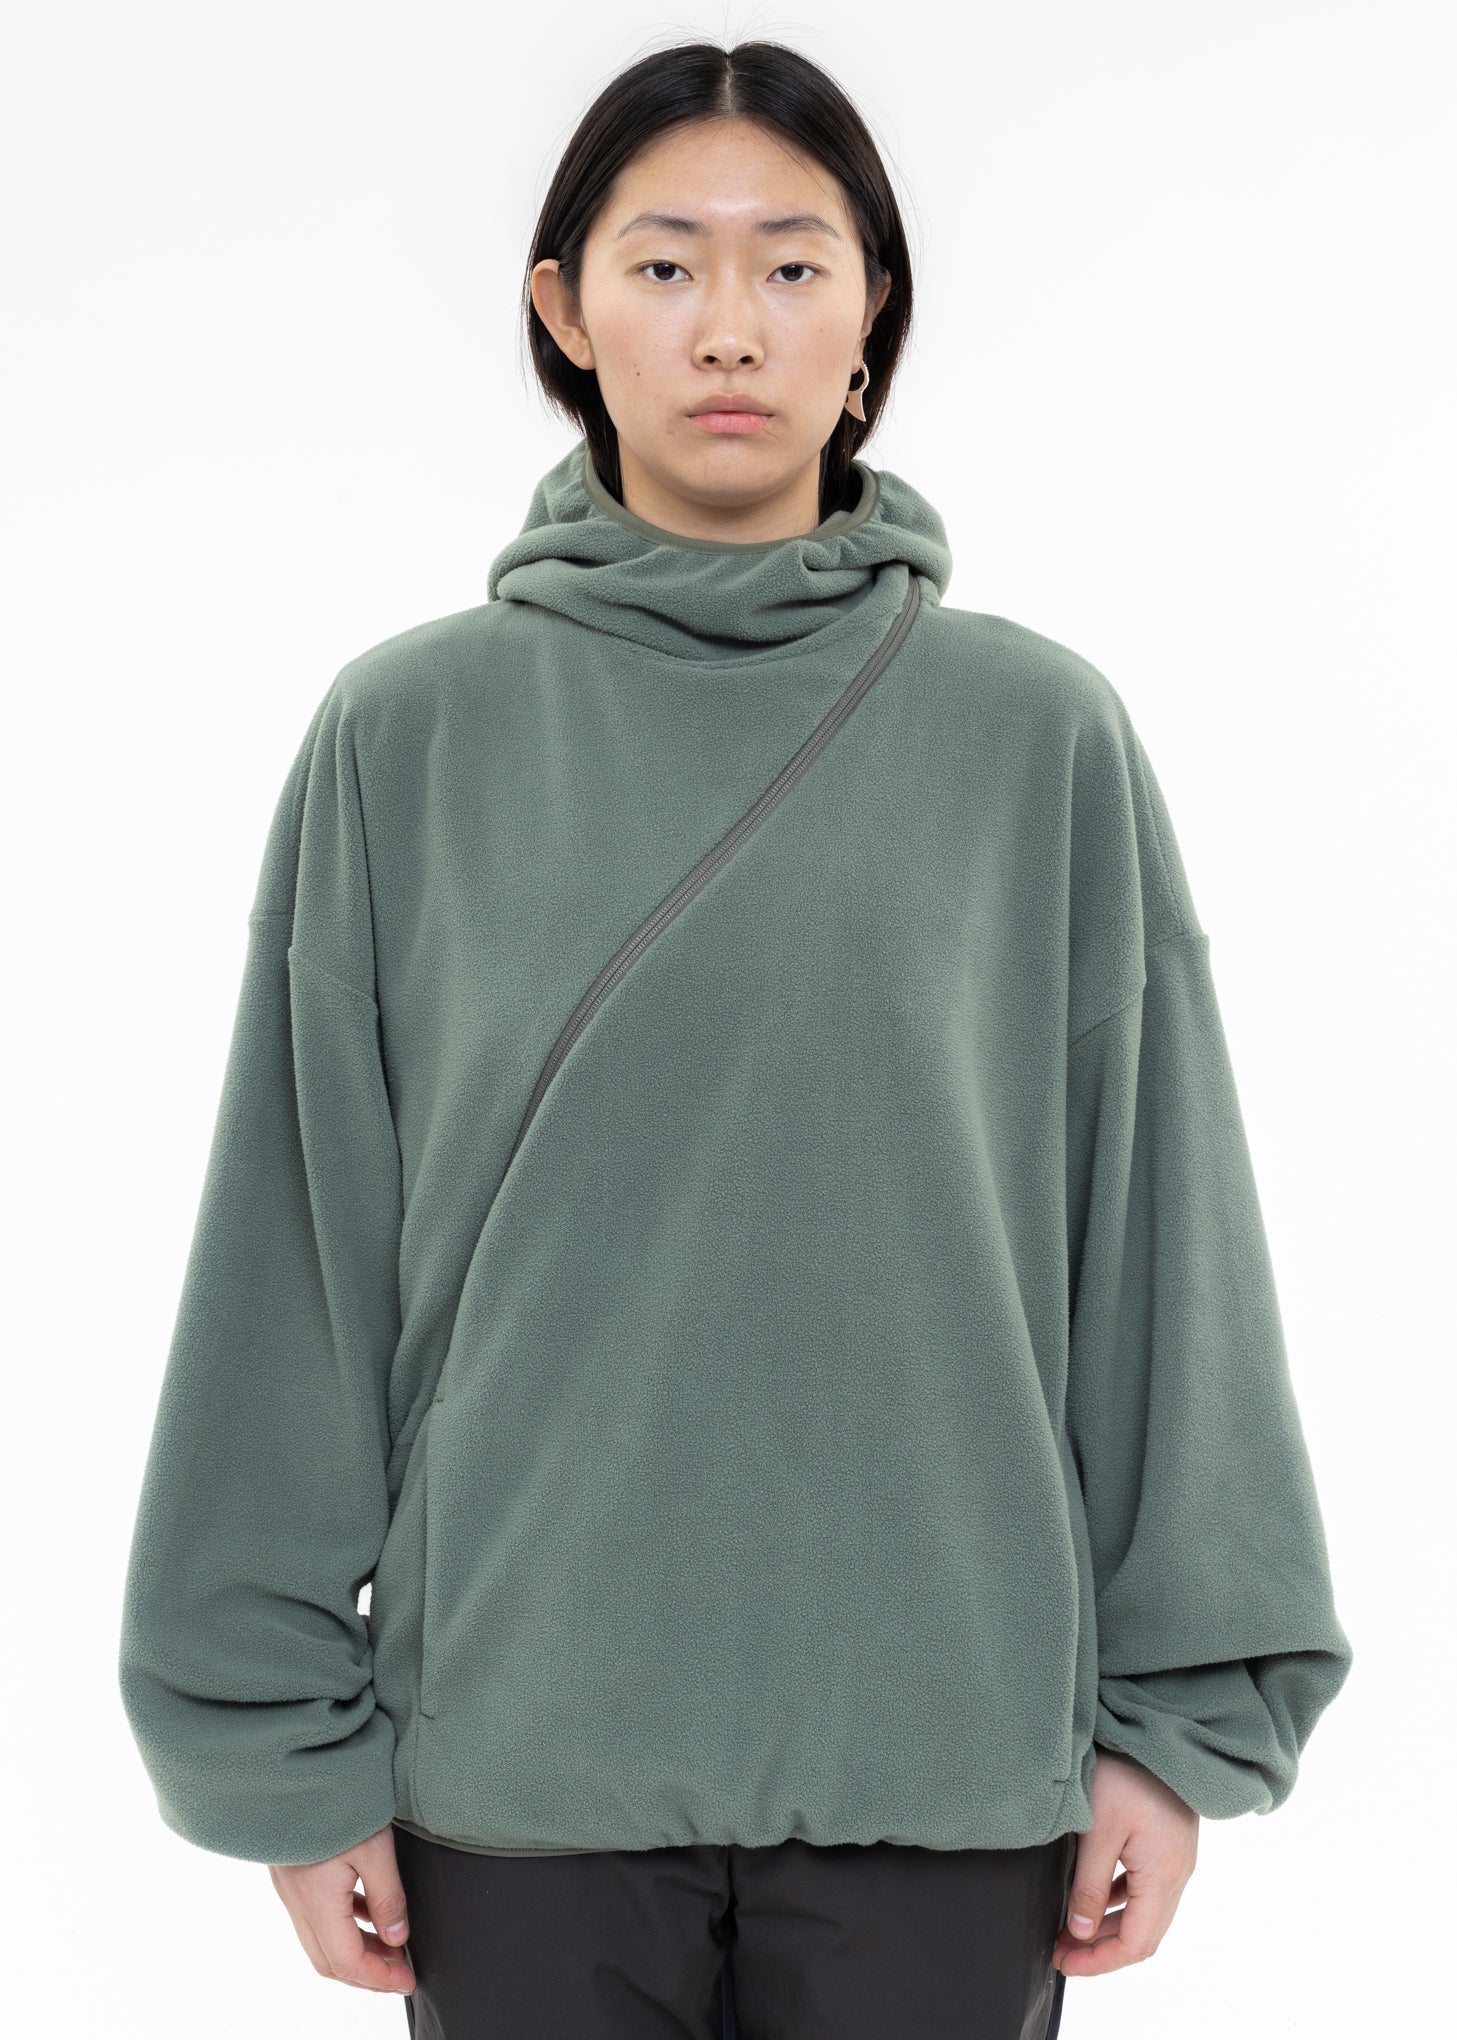 post archive faction hoodie パーカー - パーカー